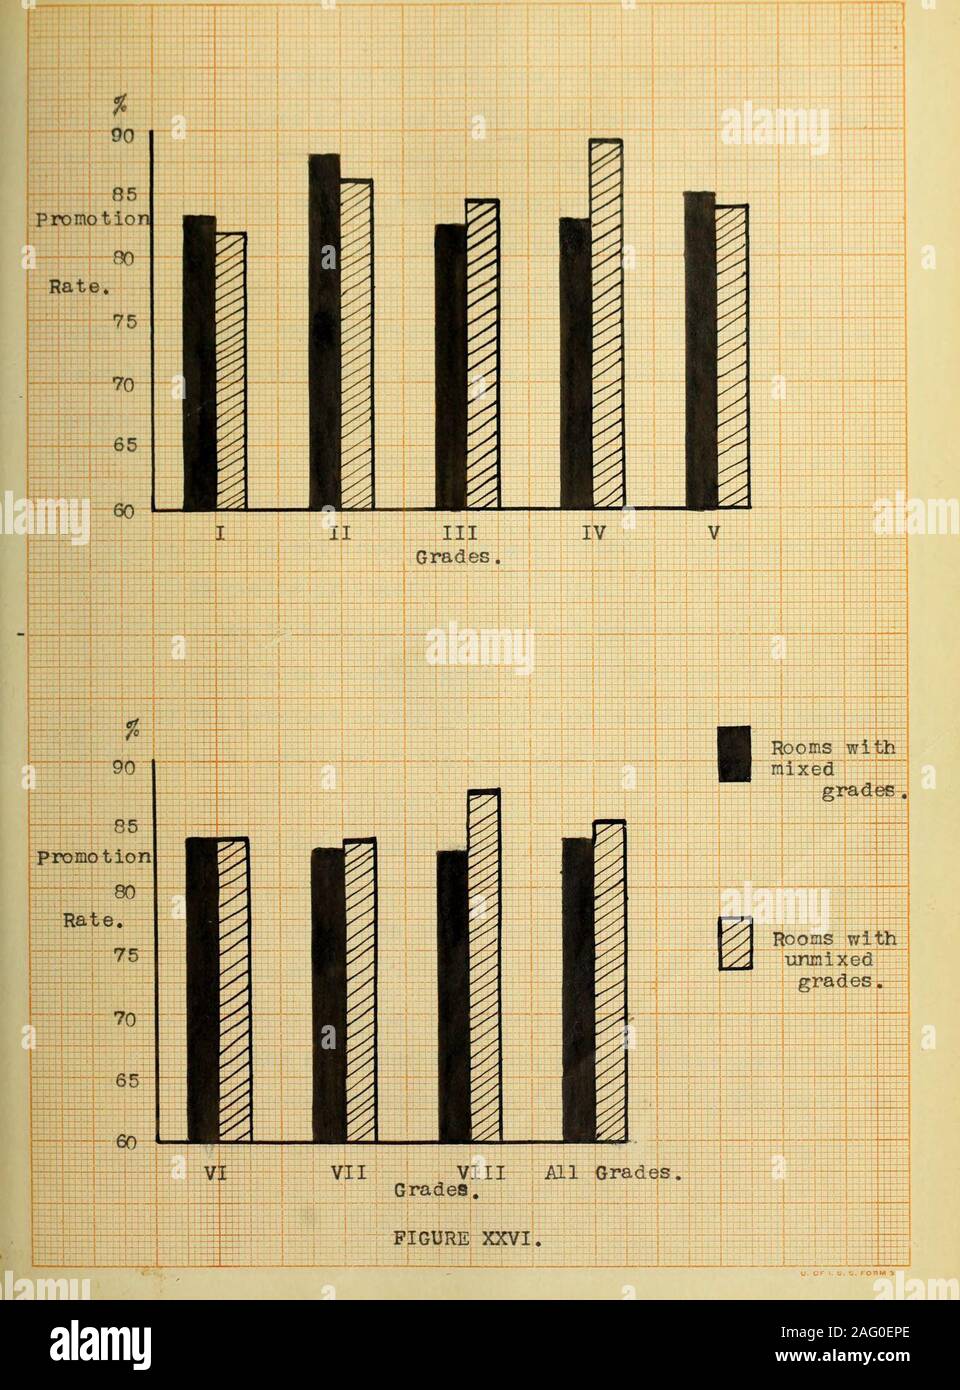 . The relation of the size of the class to school room efficiency. nder Grade I whensections of these grades are seated in the same room with the FirstGrade. Likewise some sections of Grade III were included in GradeII. In all cases of mixed rooms the grade just above was included TABLE XI. (Showing the effect on the promotion rate of mixed grades in a roomj I. II. III. IV. No. of Prom. No. of prom. No. of prom. No. ofprom. rooms, rate, rooms, rate, rooms, rate, rooms.rate. Mixed grades. 24 83. 1 16 88. 1 23 82. 4 19 82.6 Unmixed n 111 81.9 9 0 86. 1 8 5 8 4. 5 79 89.2 135 82. 5 106 87. 1 10 8 Stock Photo